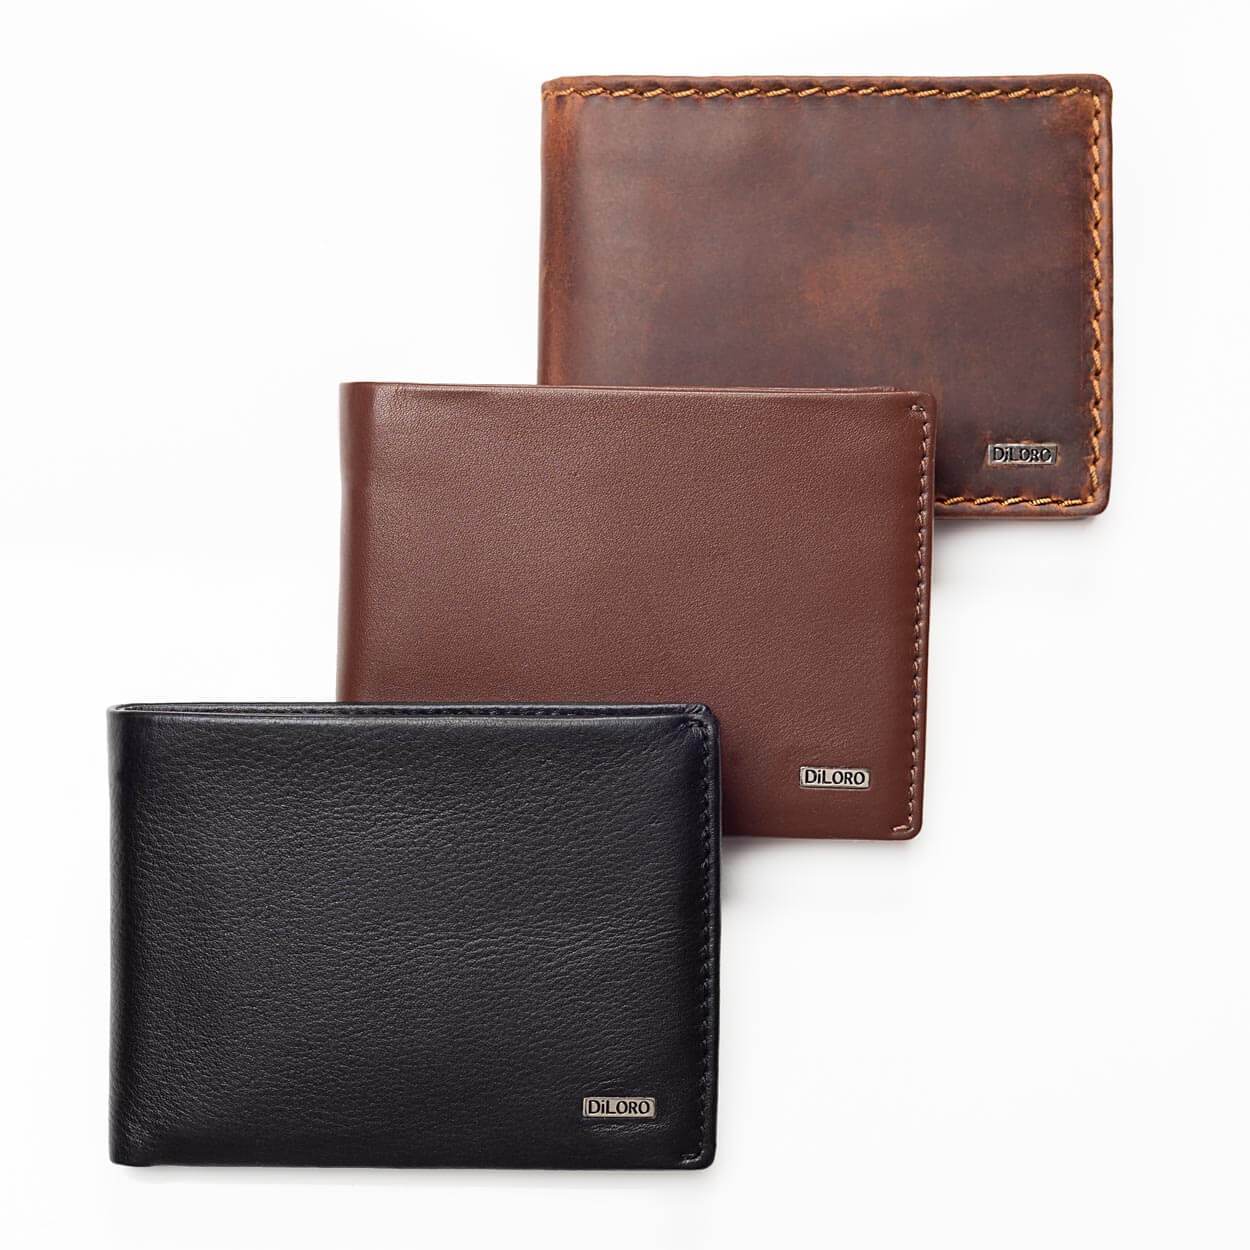 Compact Wallets - Small leather goods - Men's Fashion